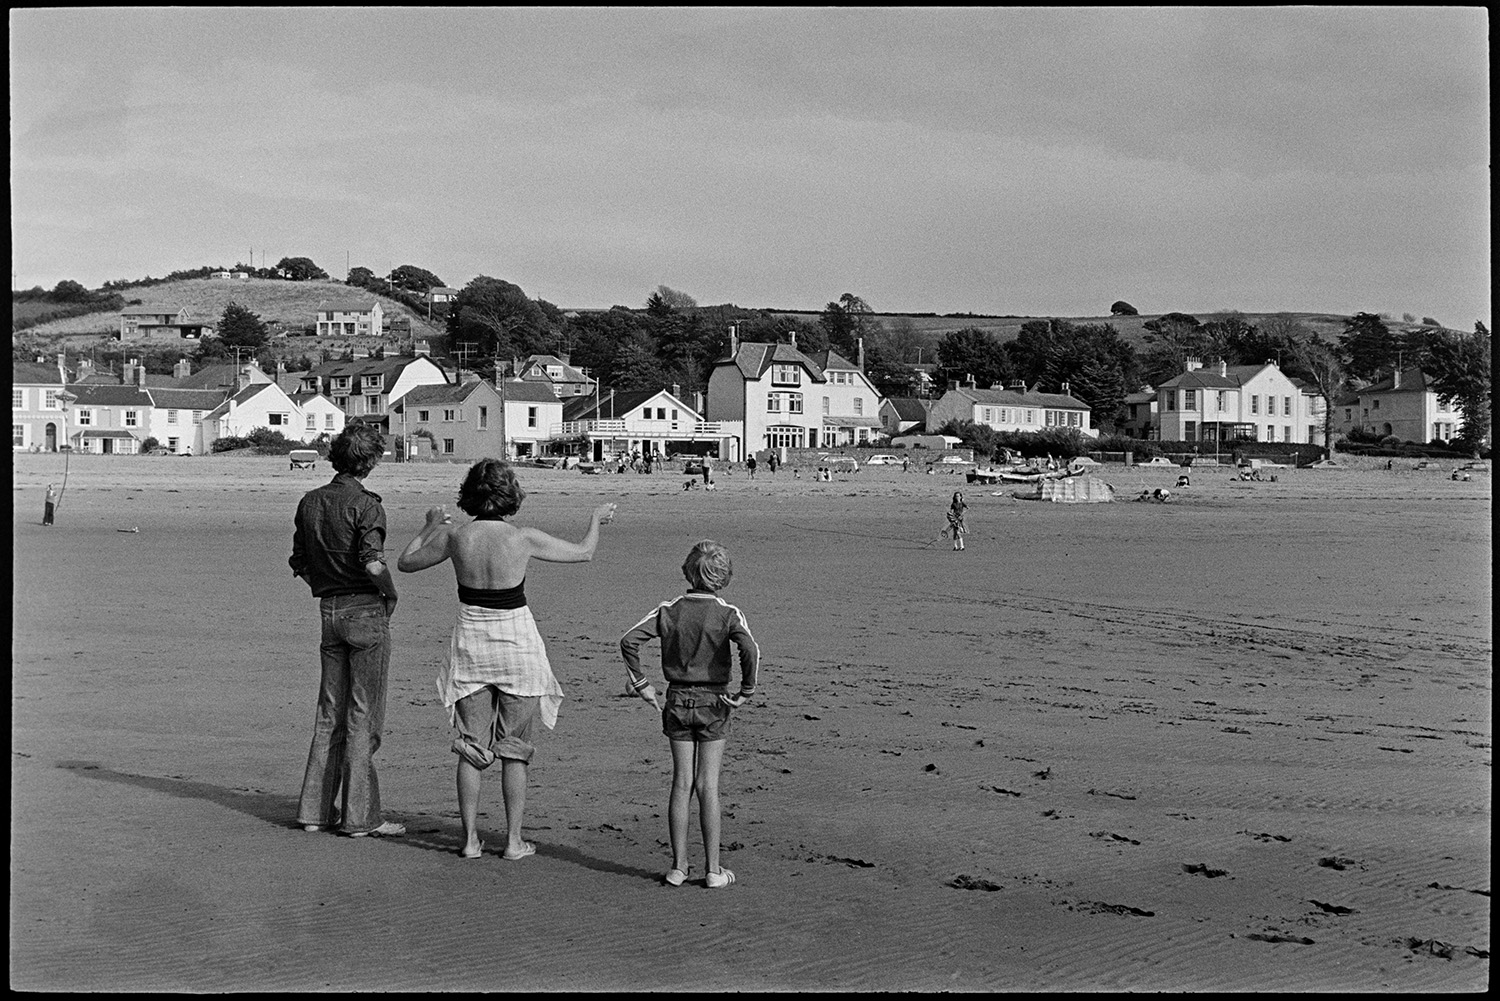 Children playing on beach, kite. Abandoned barge. 
[Holidaymakers on the beach at Instow. A family are trying to fly a kite. The buildings on the seafront are visible in the background.]